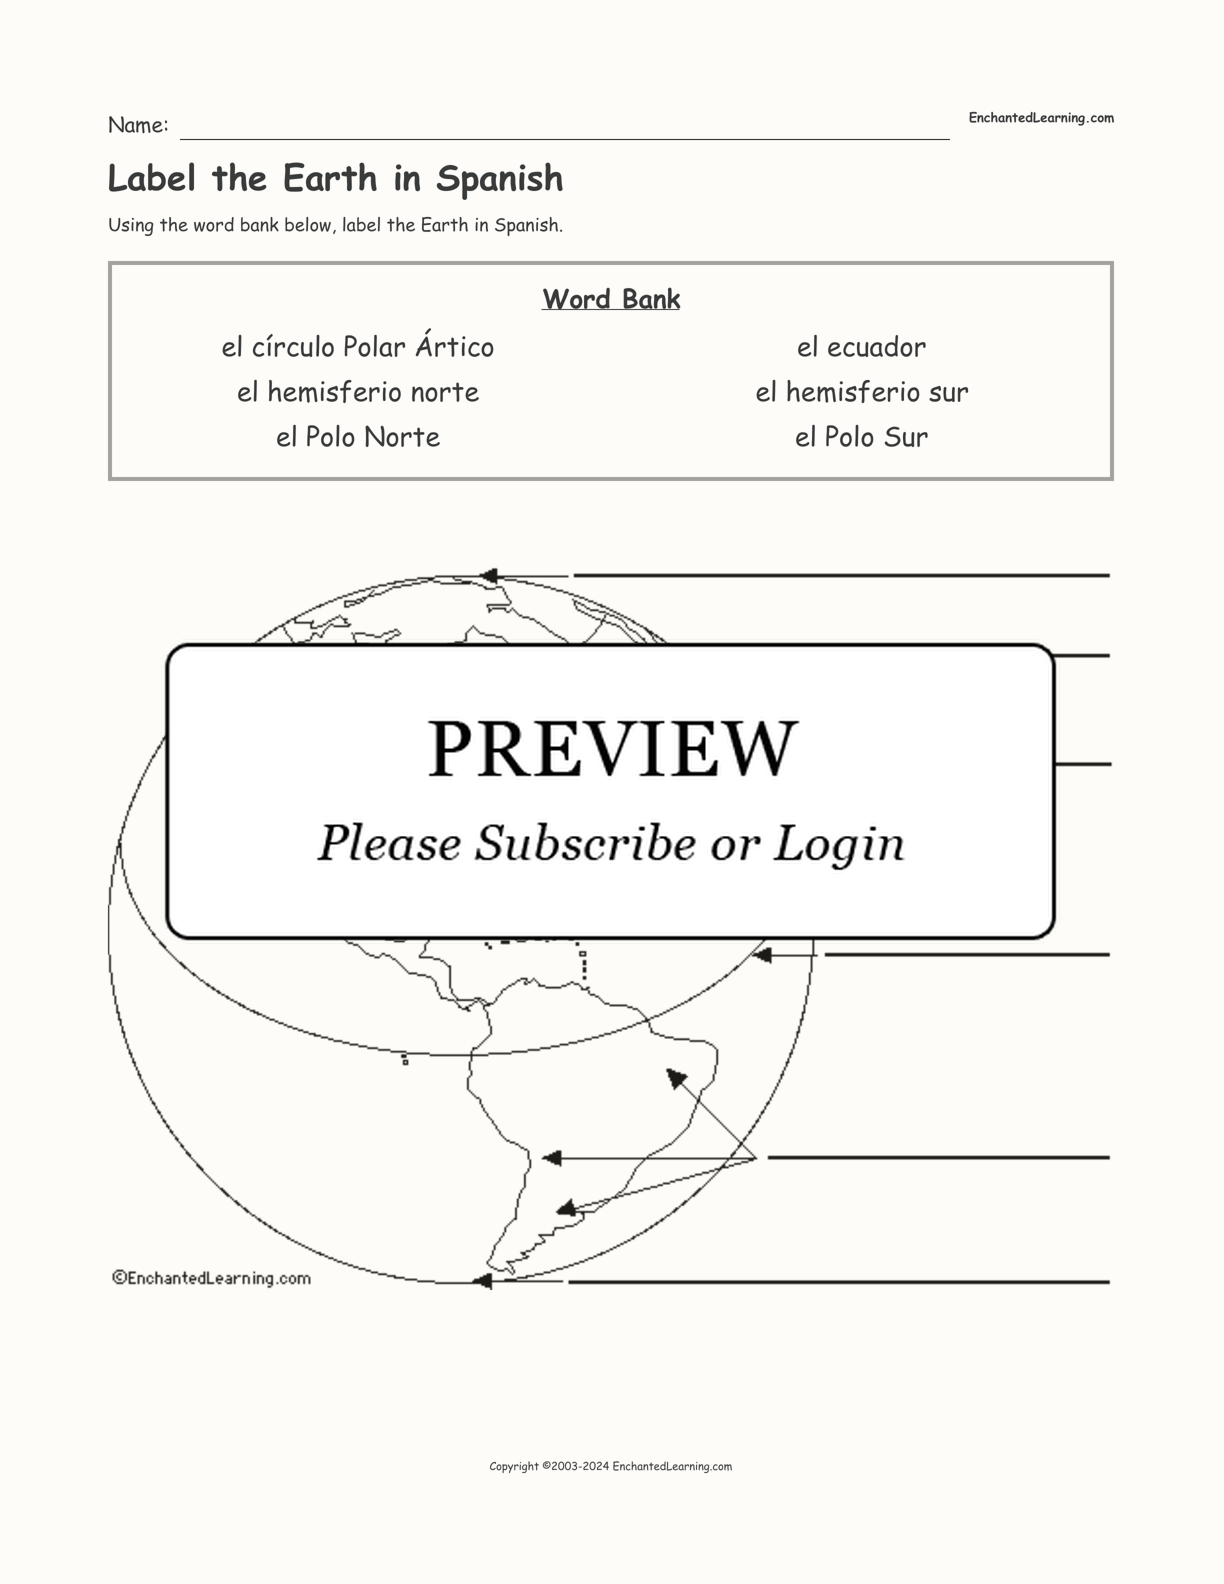 Label the Earth in Spanish interactive worksheet page 1